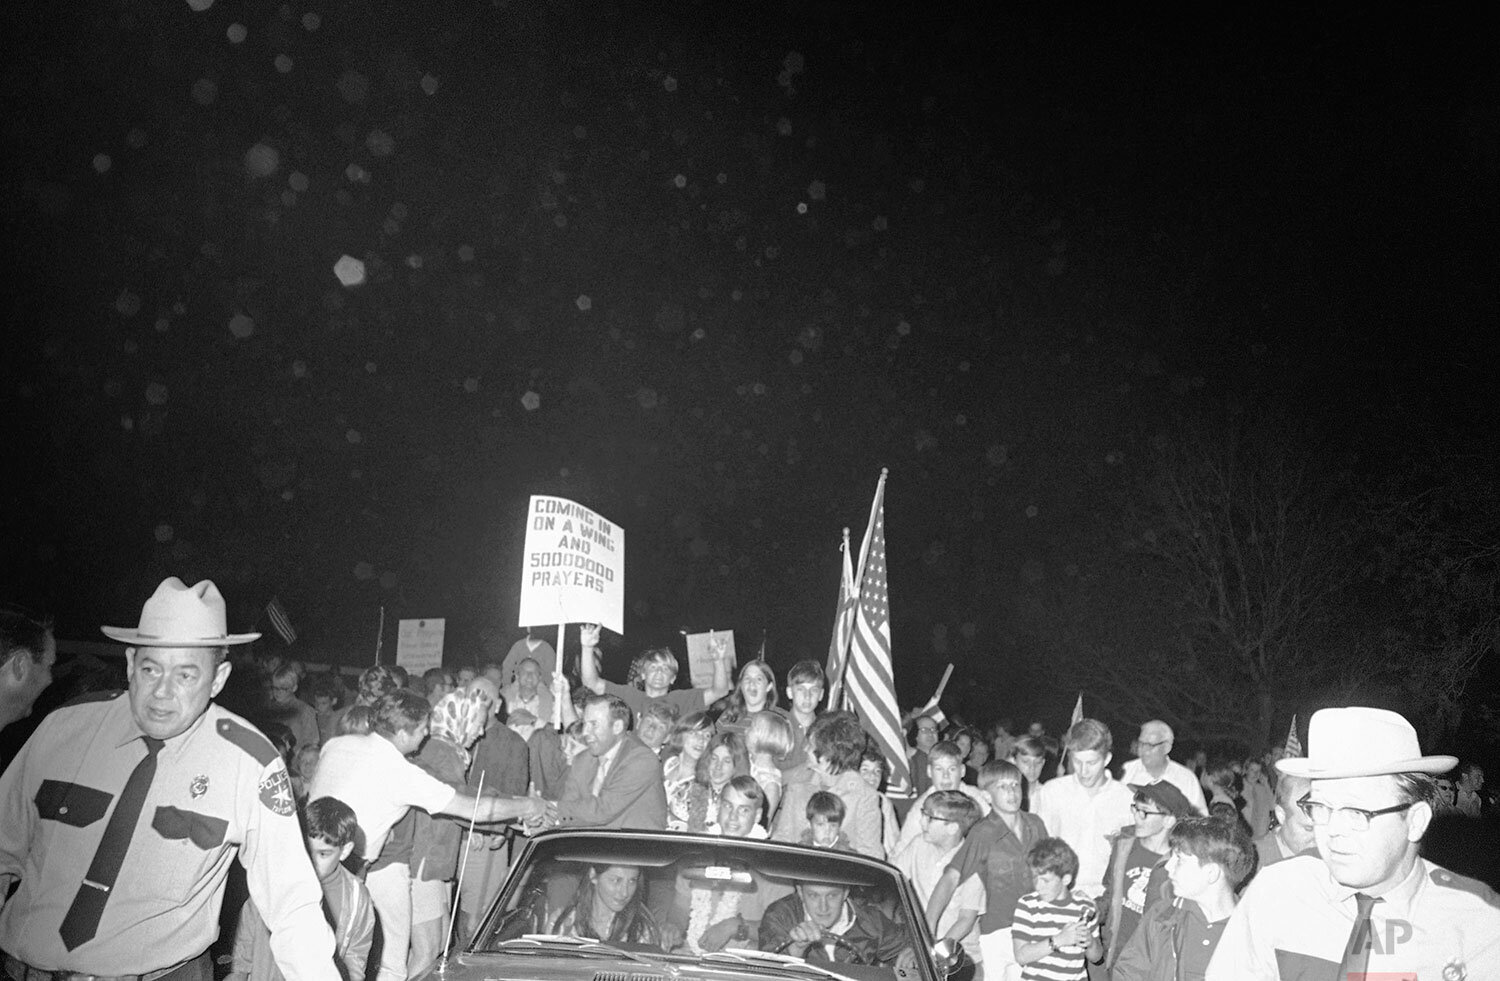  Residents of Timber Cove near the Manned Spacecraft Center greet their favorite neighbor, Apollo 13 commander James Lovell Jr., as he arrived at his home, April 19, 1970, Houston, Tex. (AP Photo) 